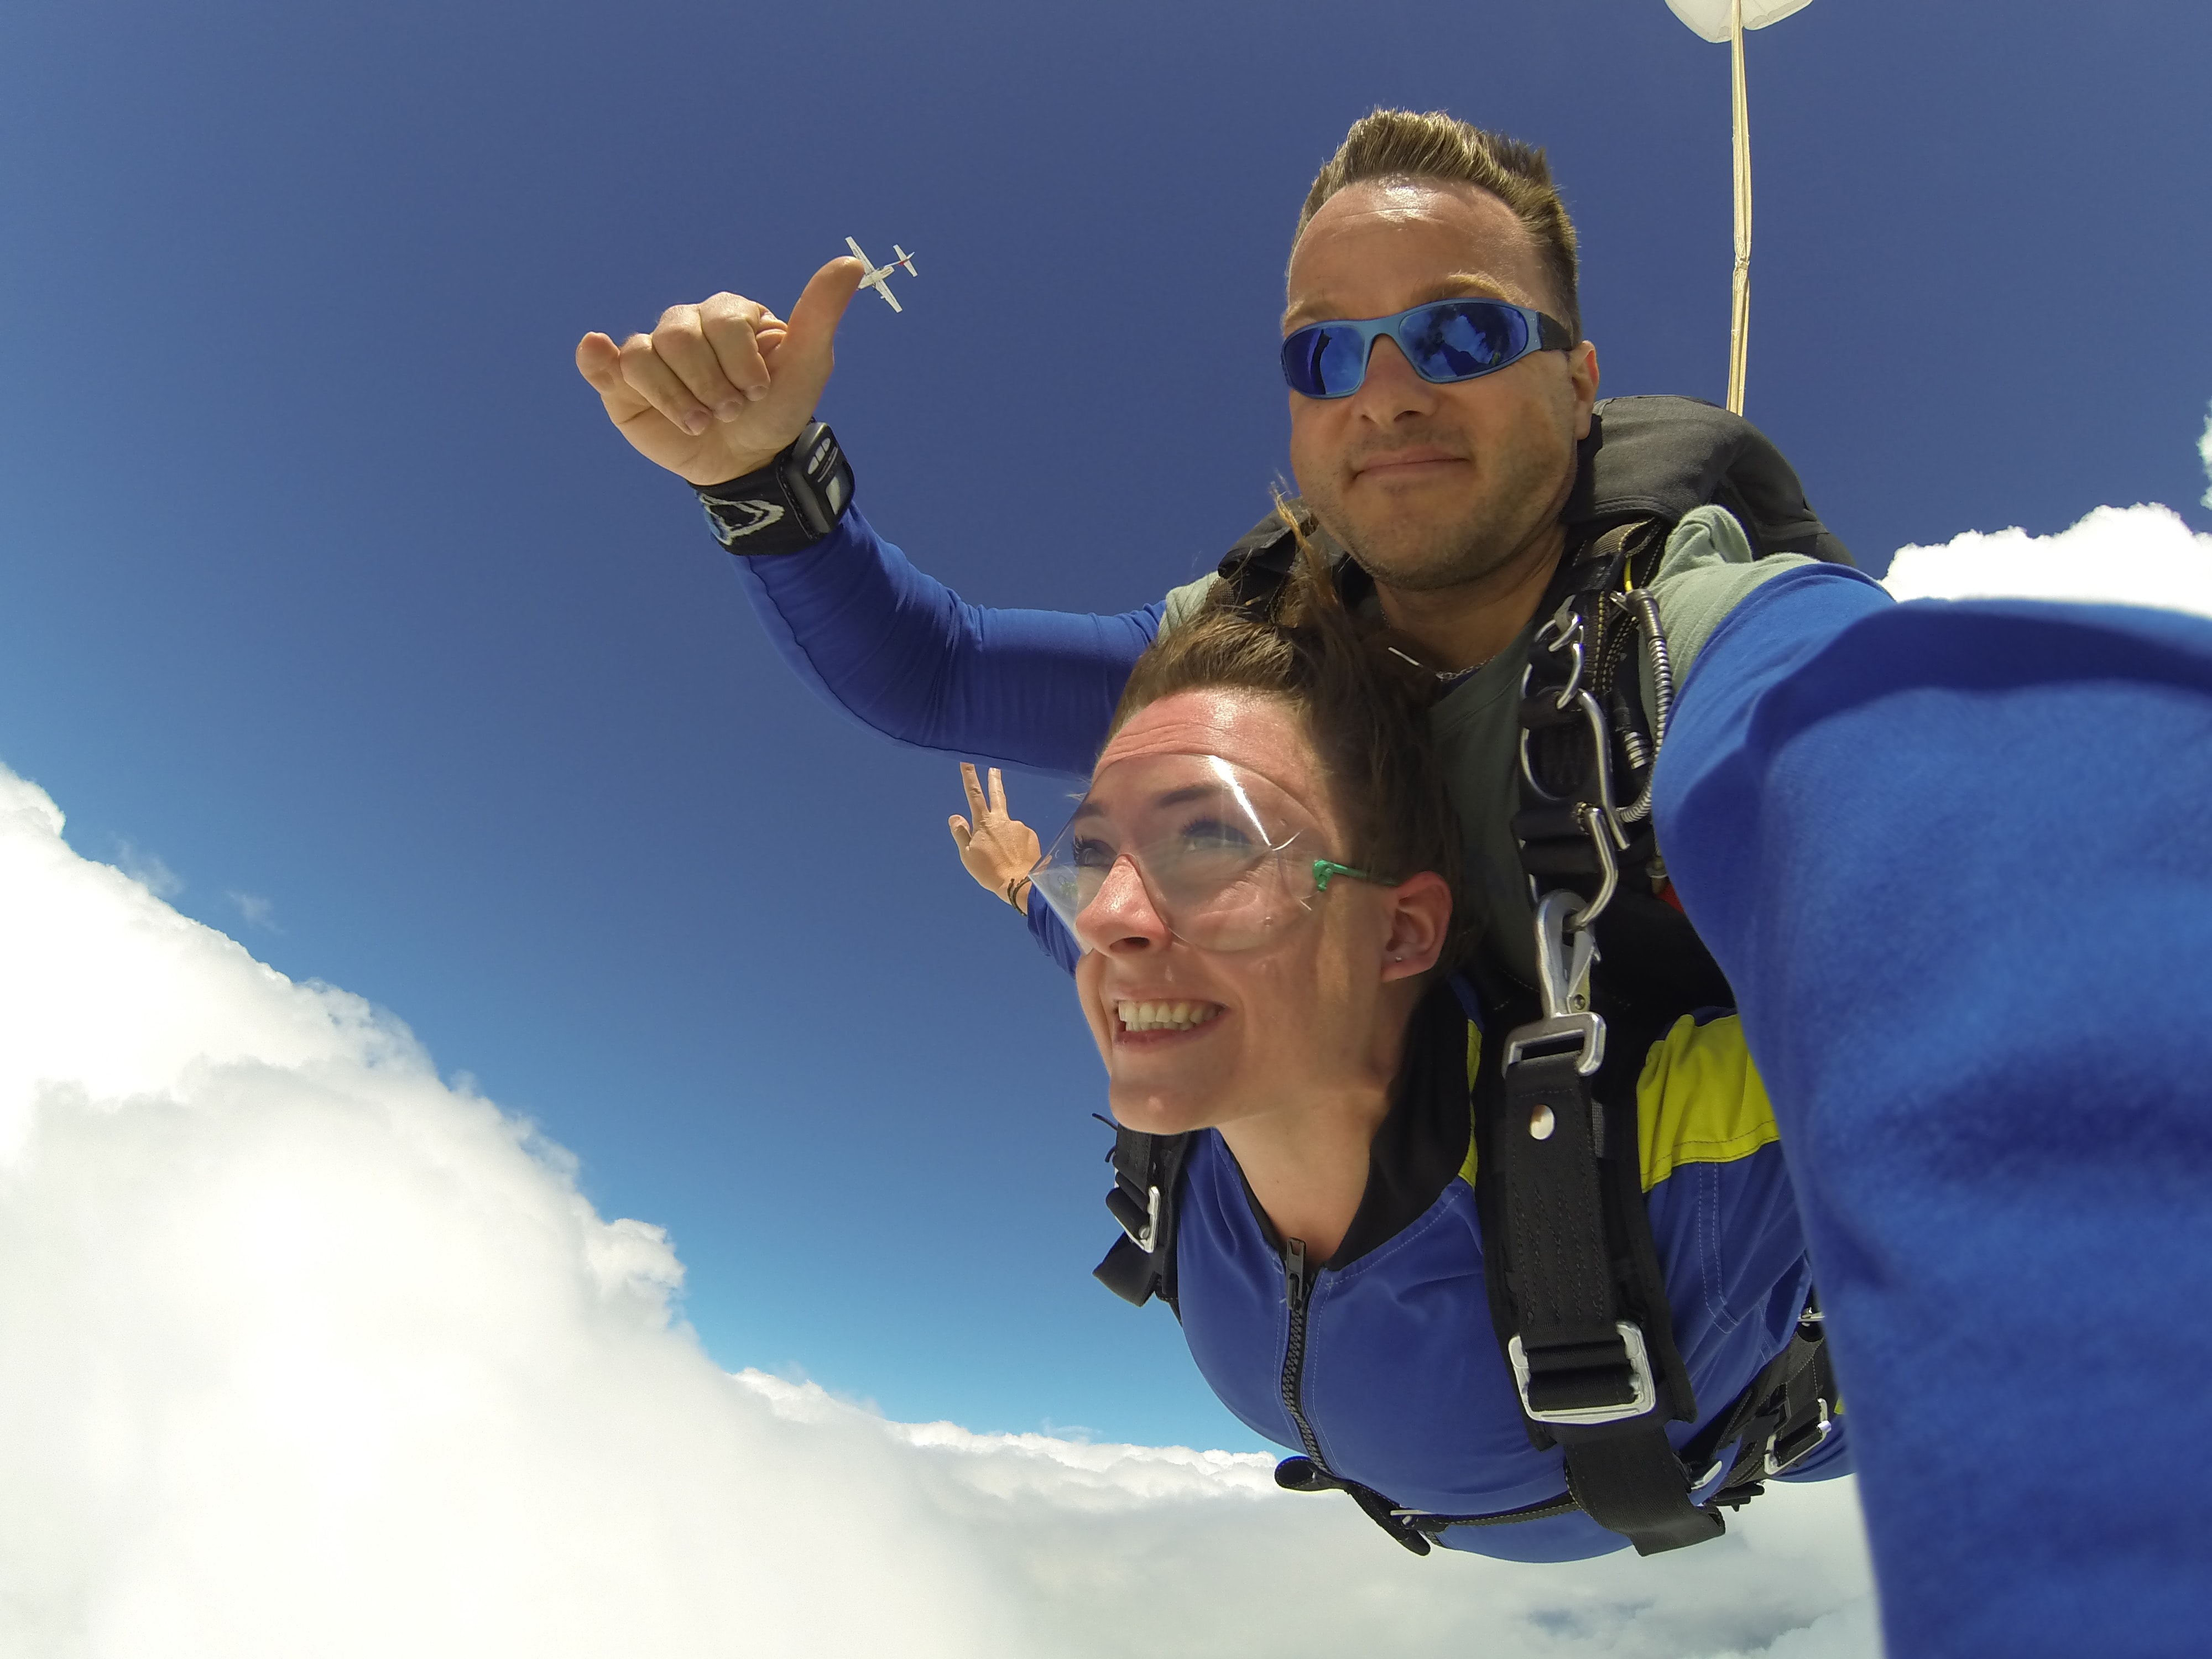 Man and woman in blue jacket doing sky diving photo